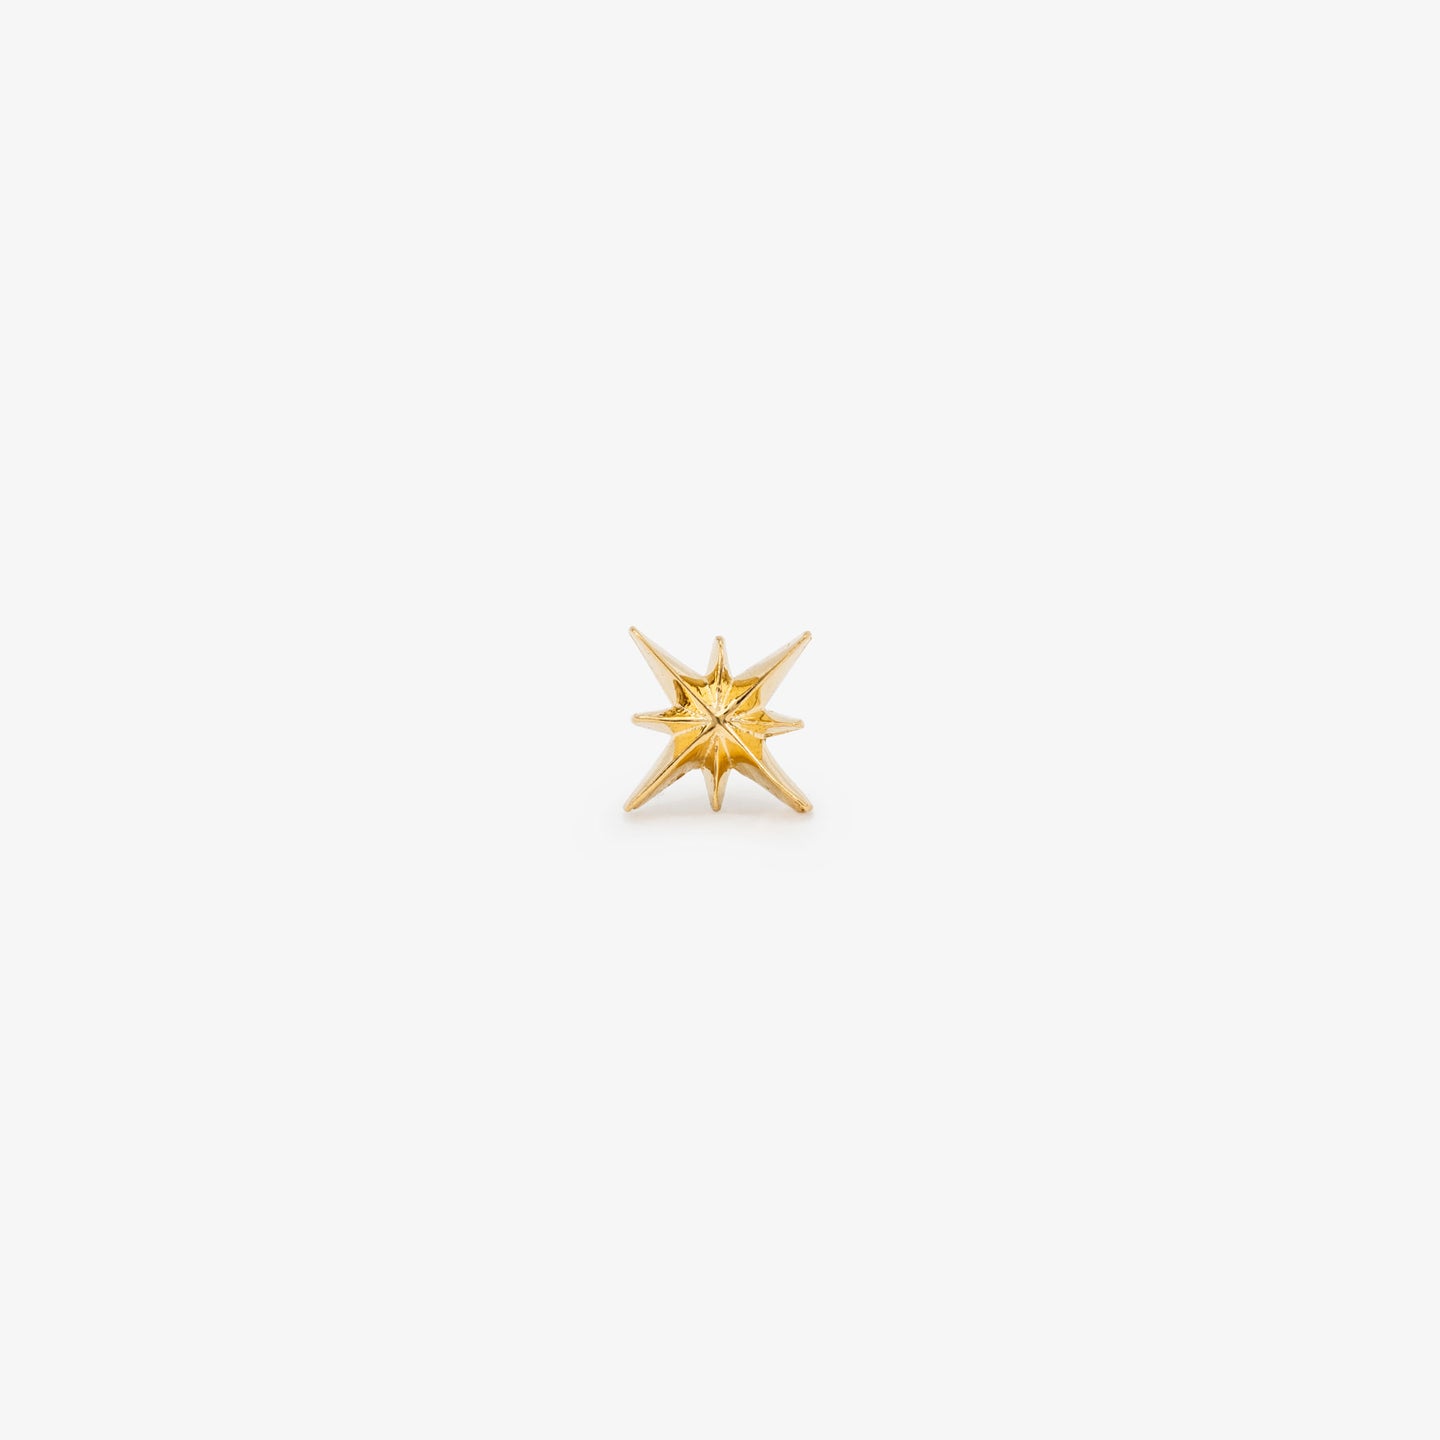 This is an 18k gold stud in the shape of a starburst color:null|18k gold